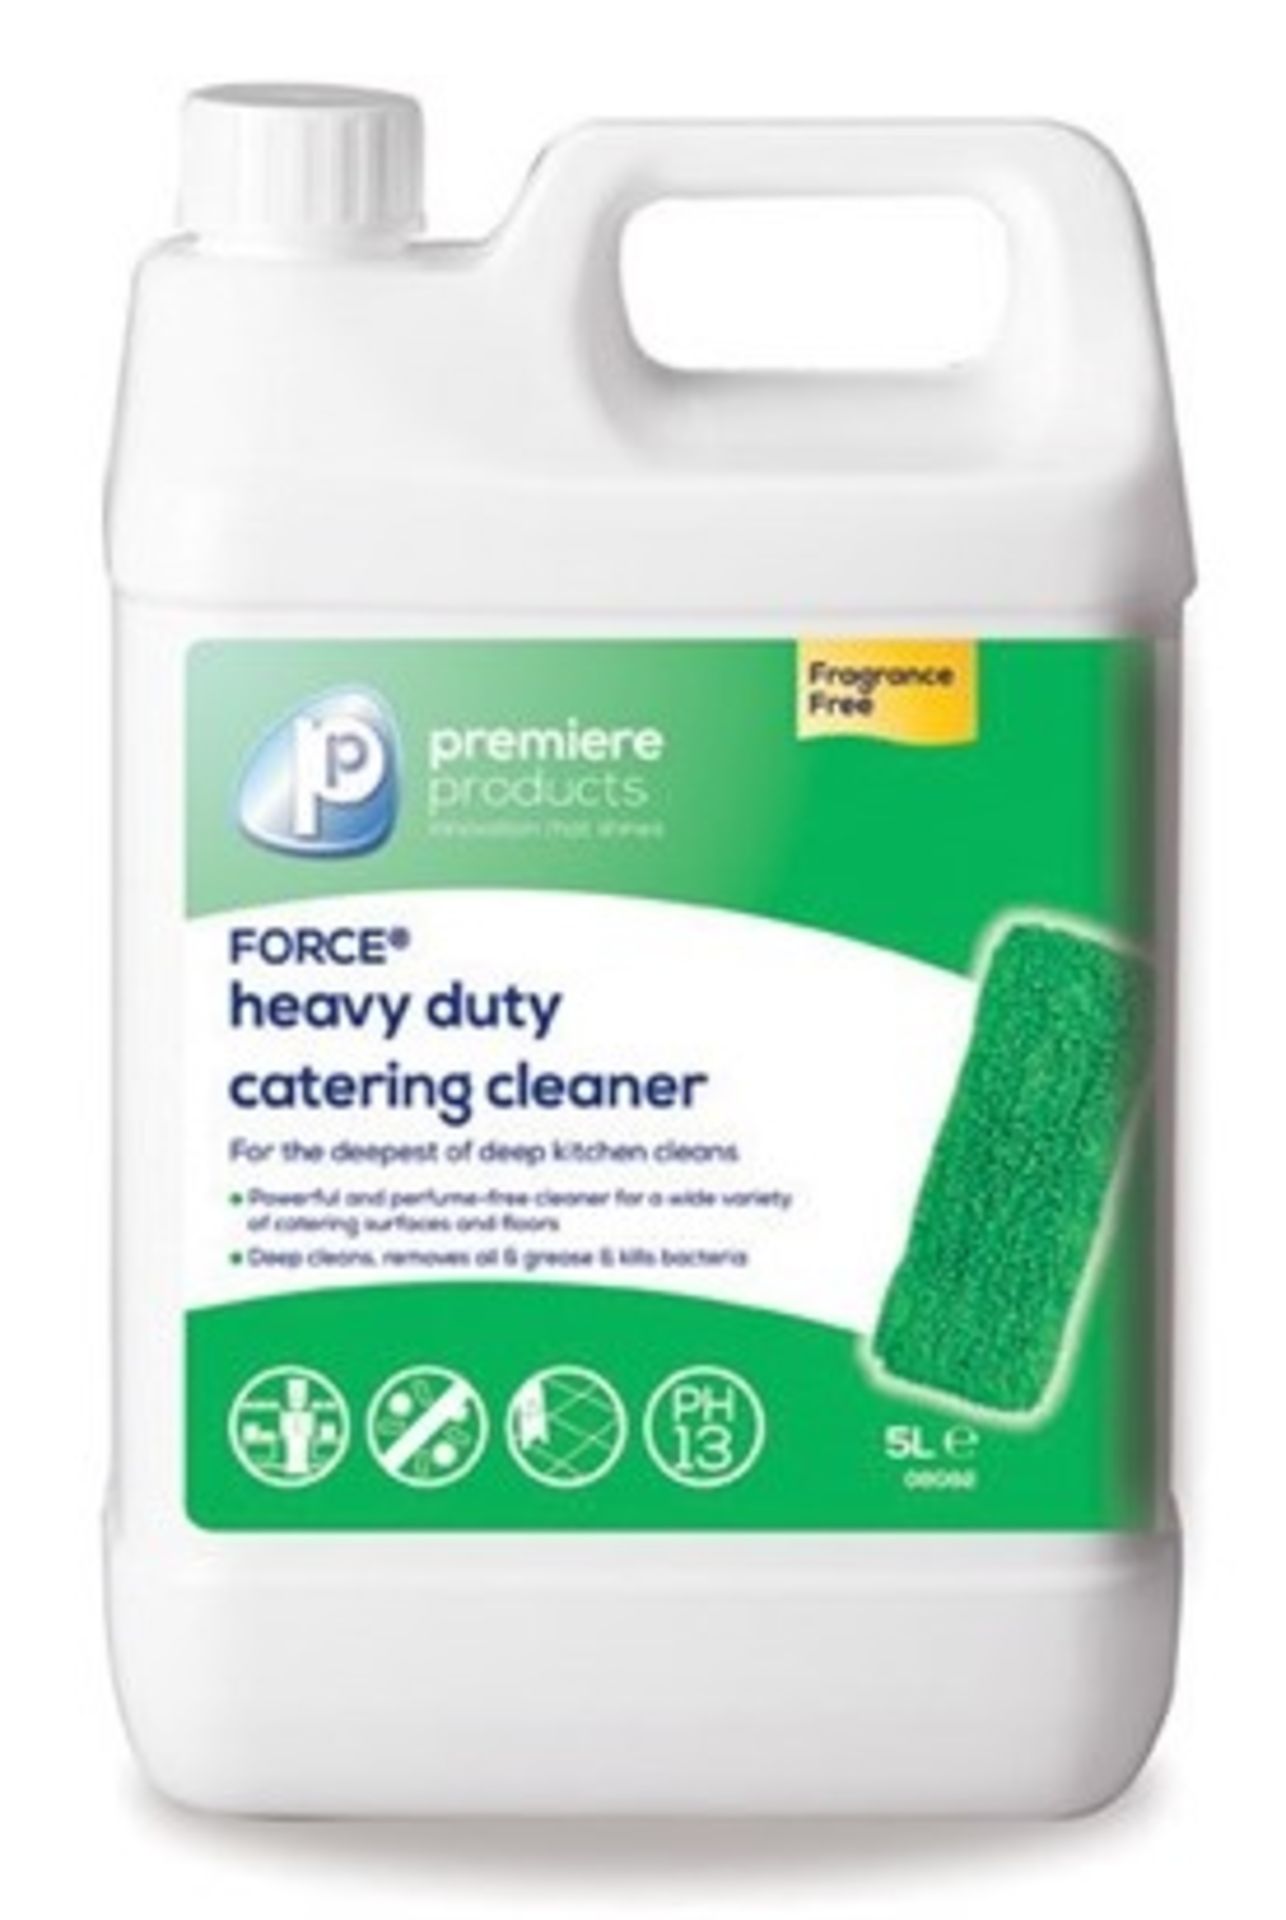 2 x Premiere Force 5 Litre Heavy Duty Degreaser - Premiere Products - Includes 2 x 5 Litre Container